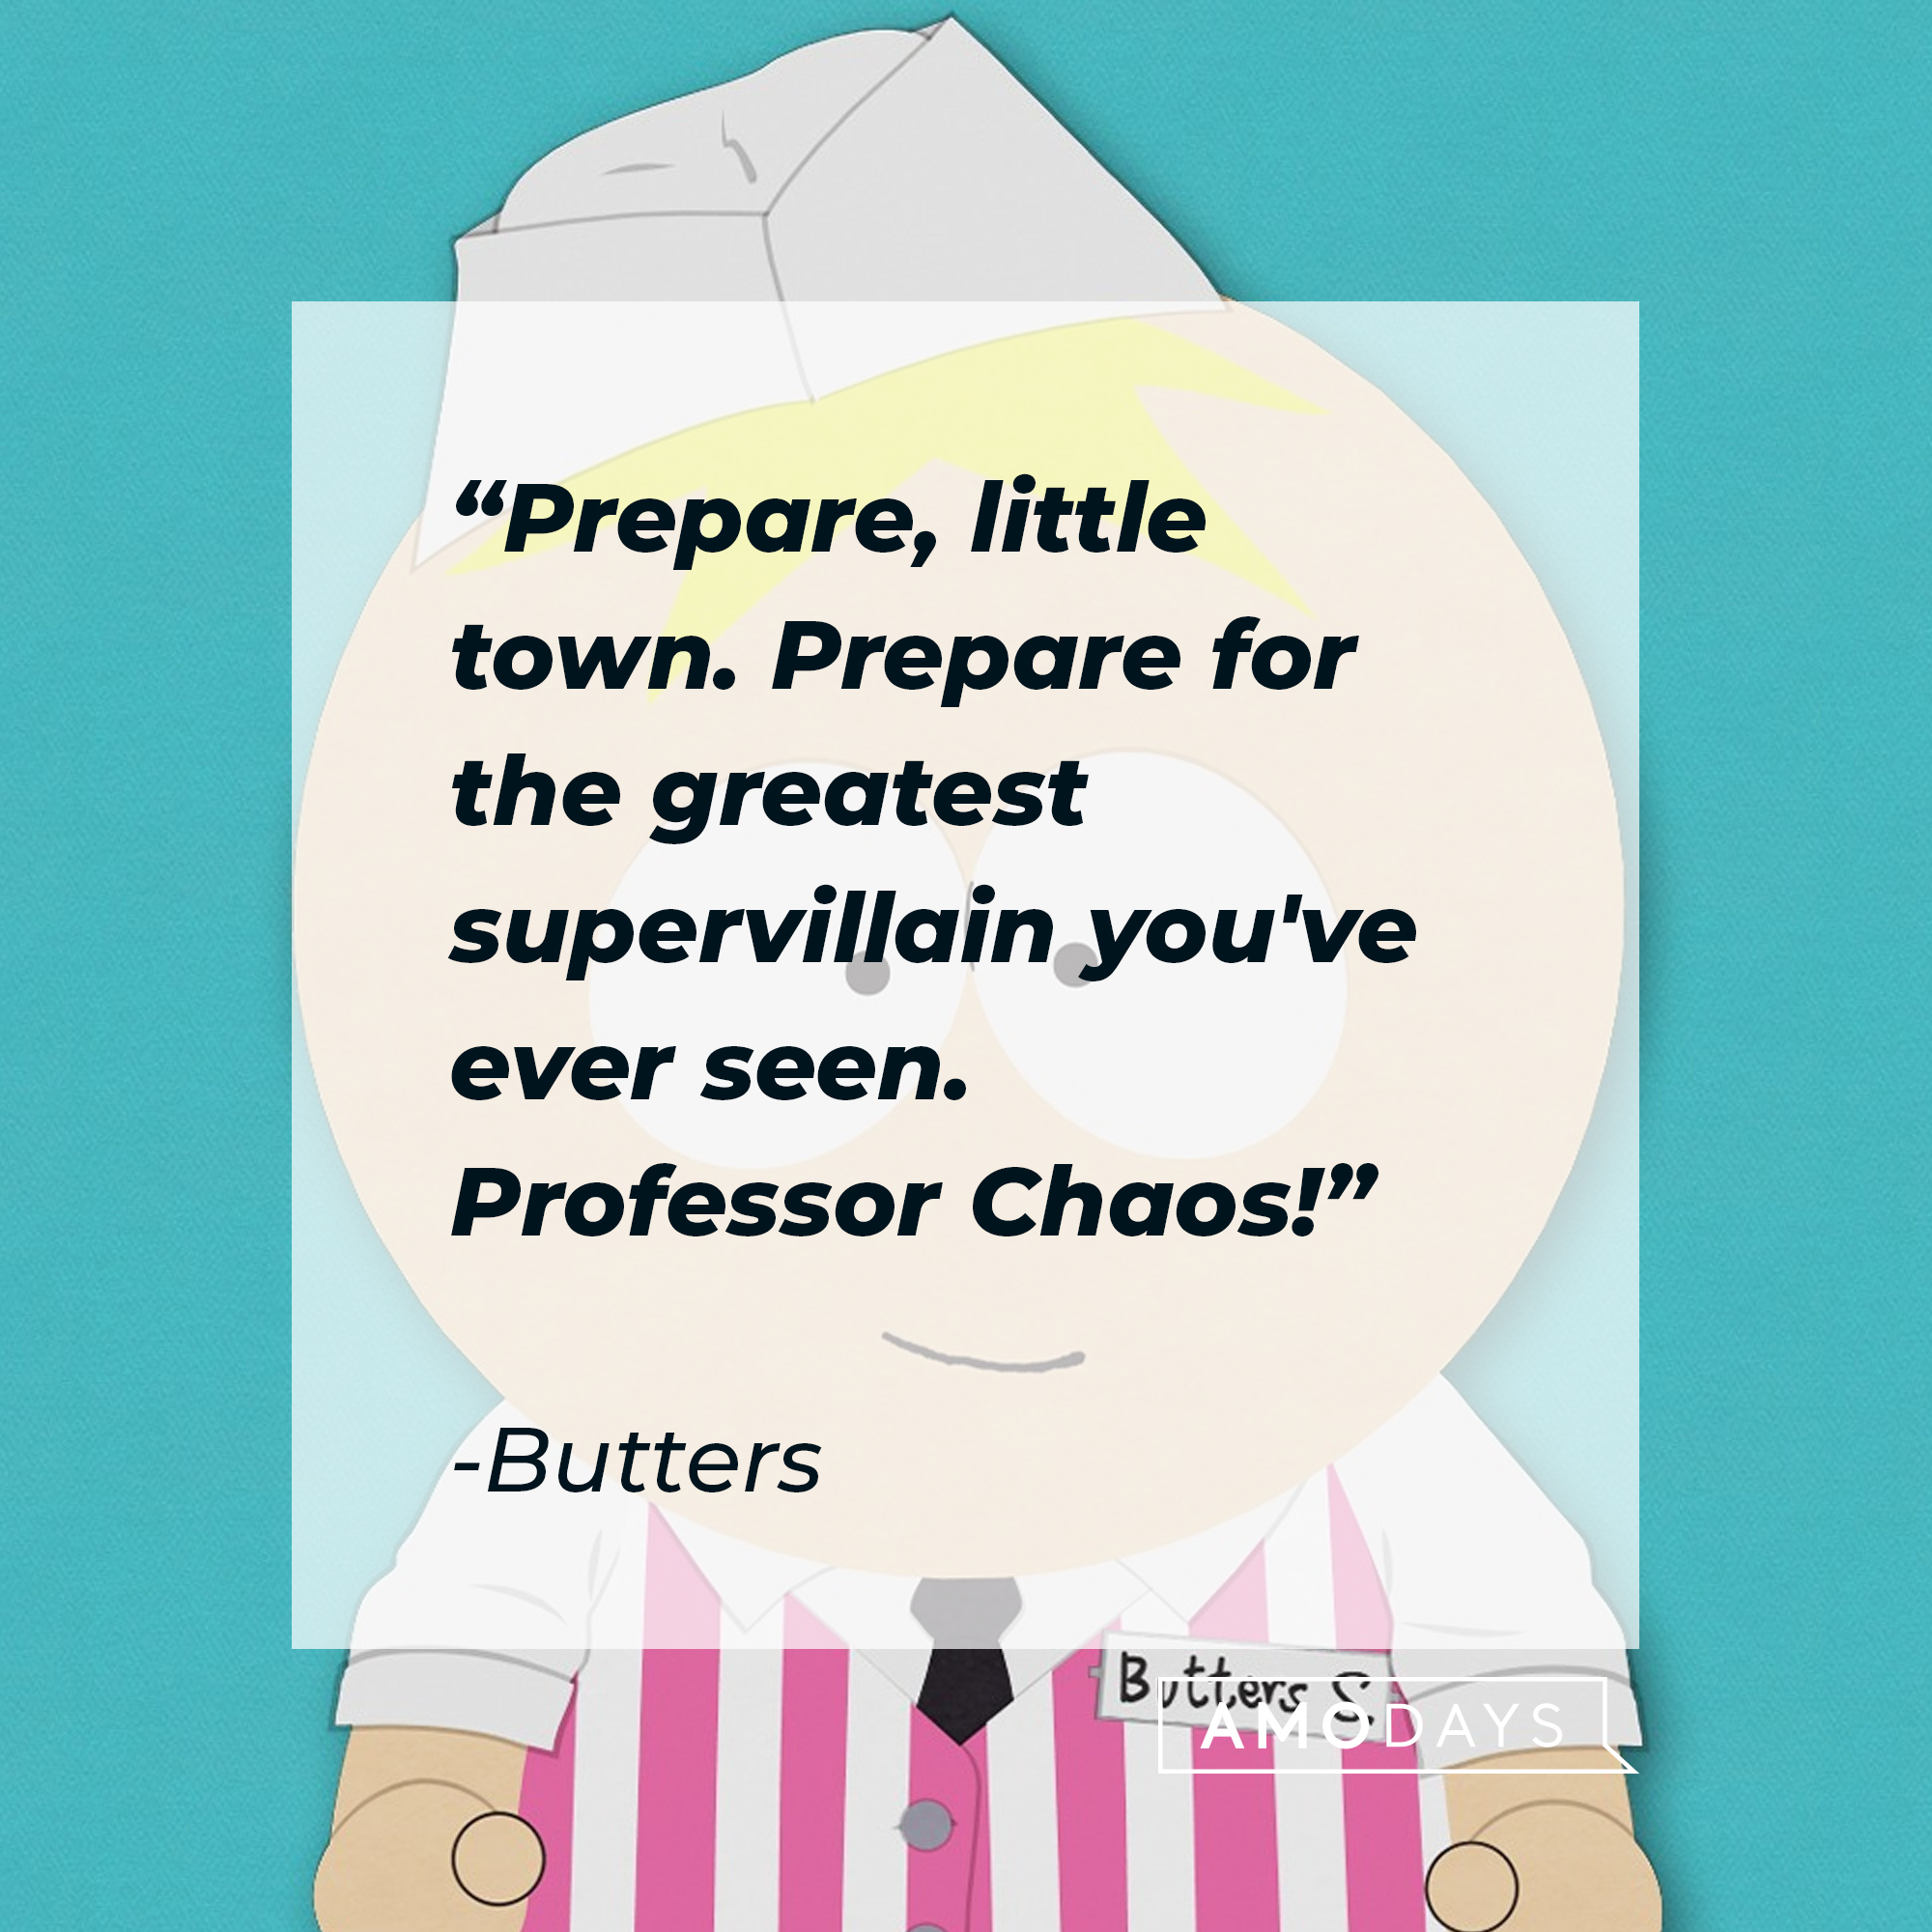 Butters' quote: "Prepare, little town. Prepare for the greatest supervillain you've ever seen. Professor Chaos!" | Source: facebook.com/southpark